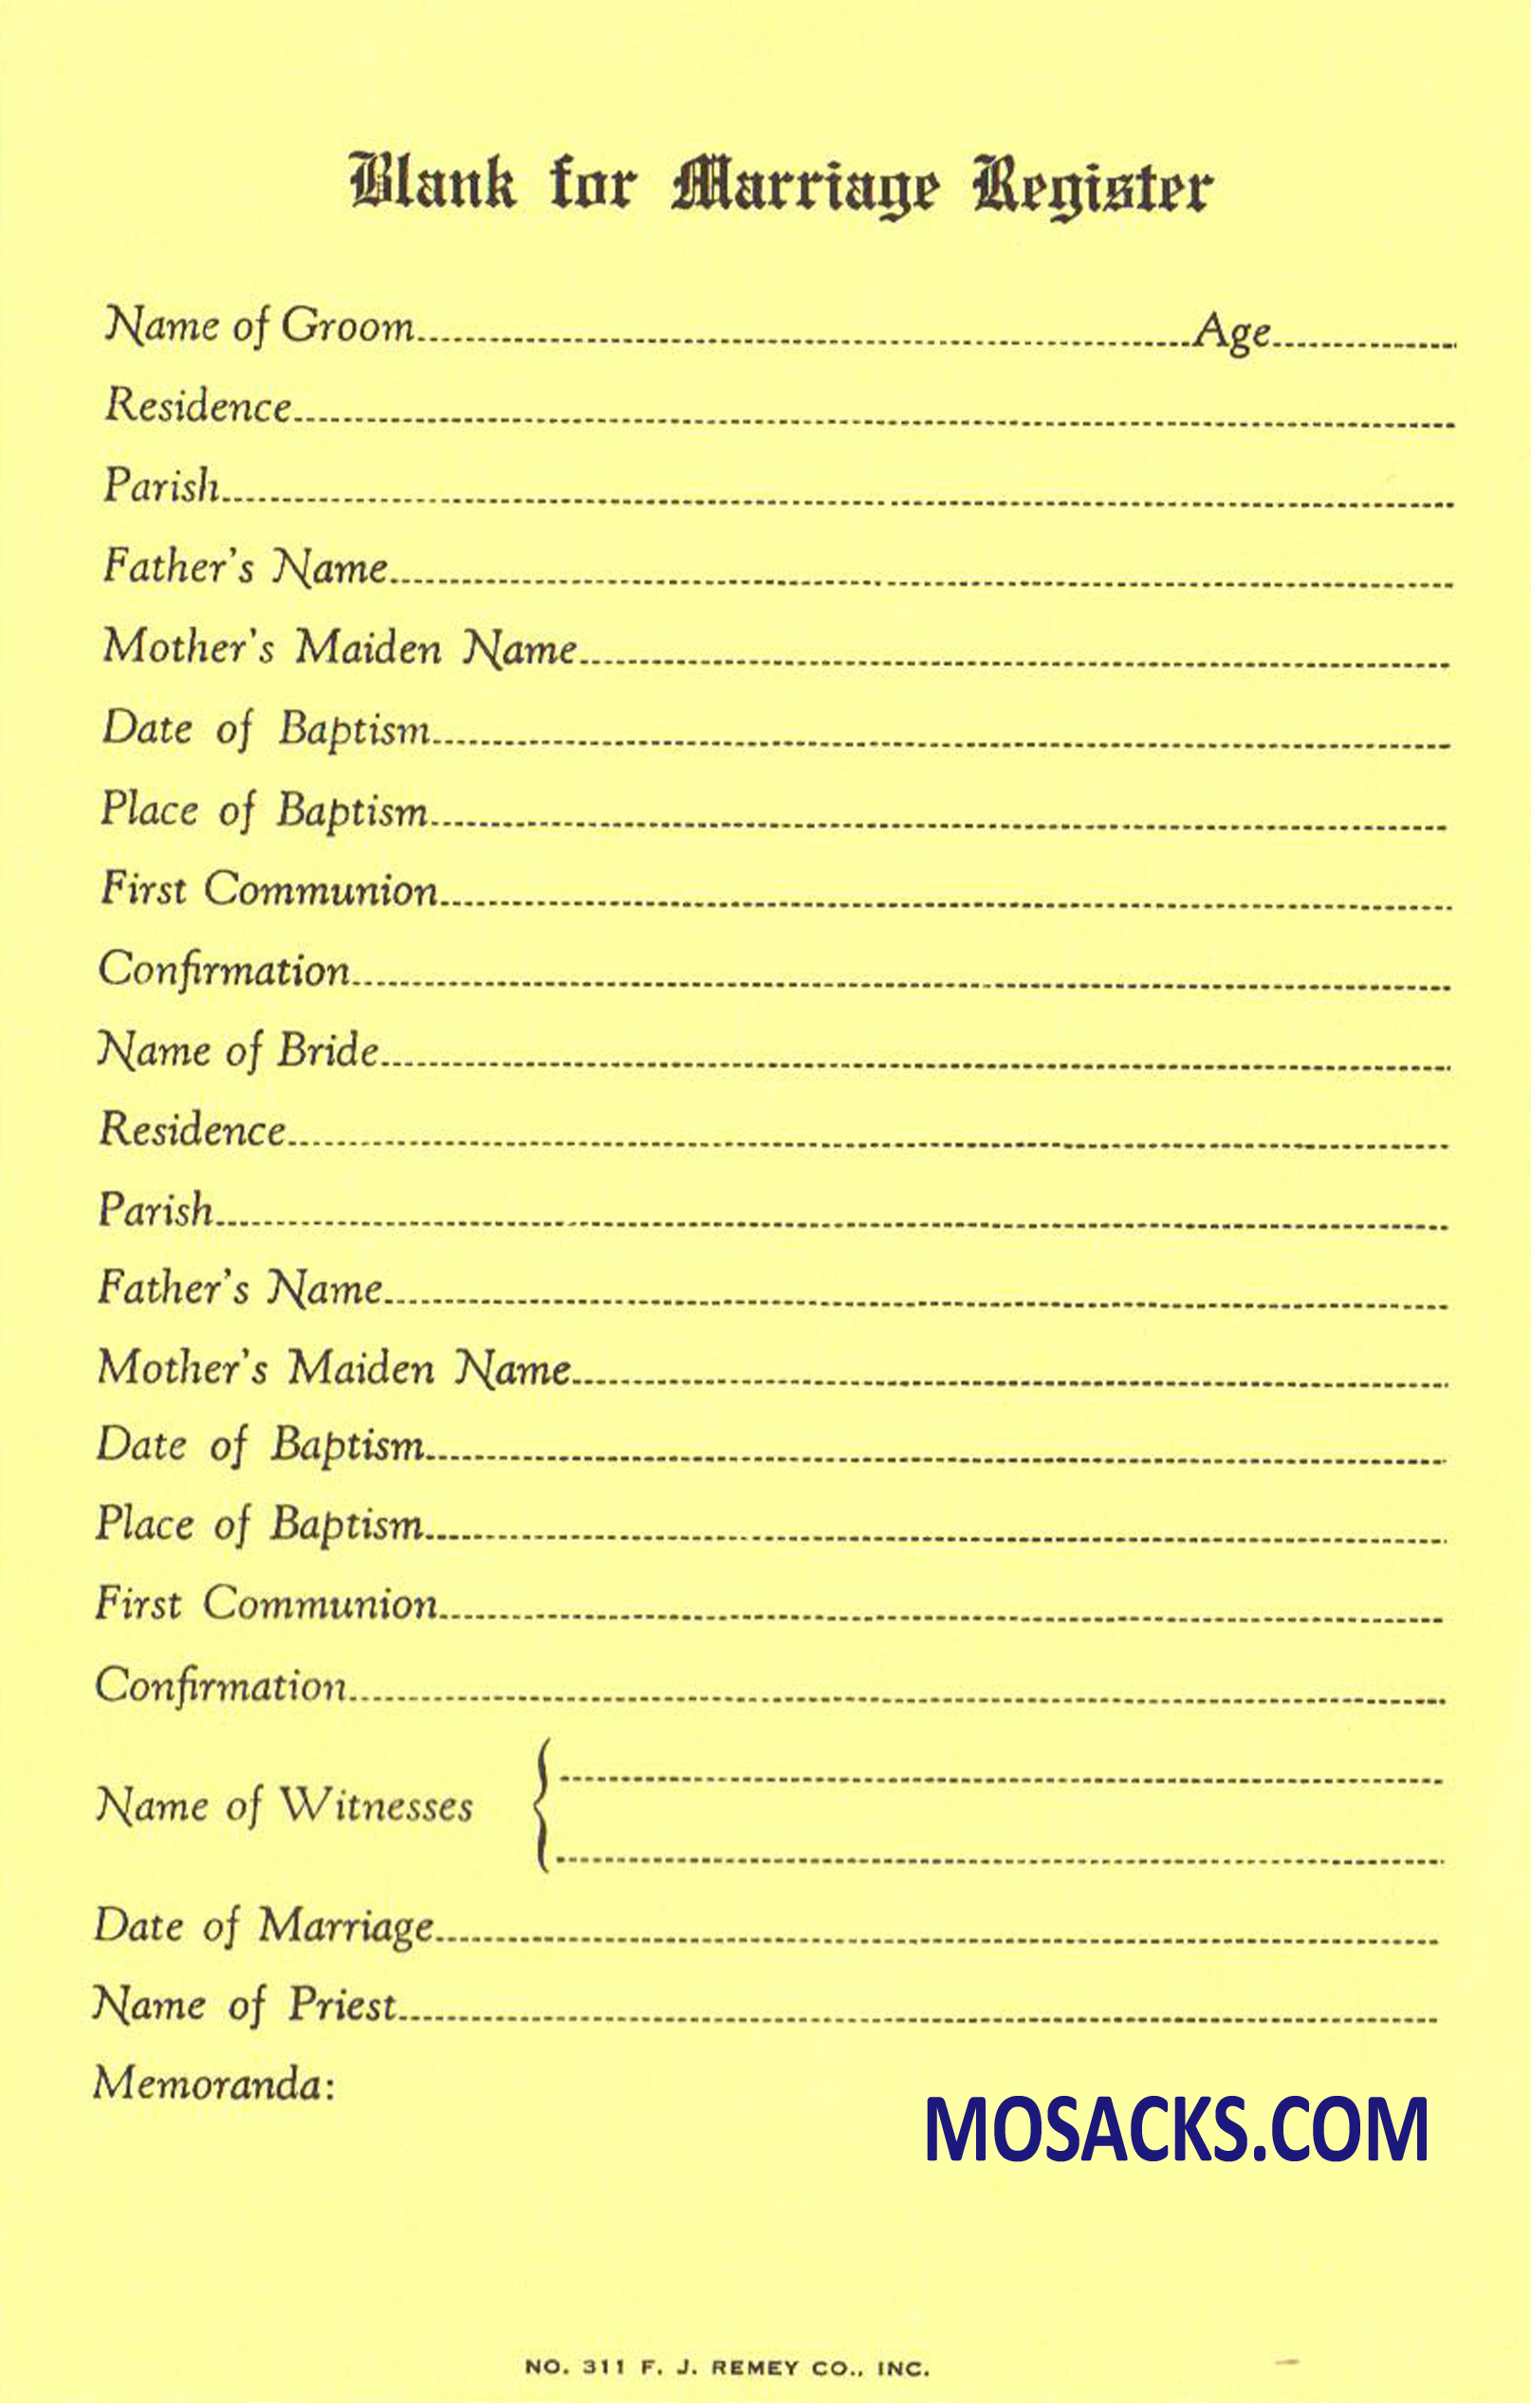 Marriage Register Blanks No. 311